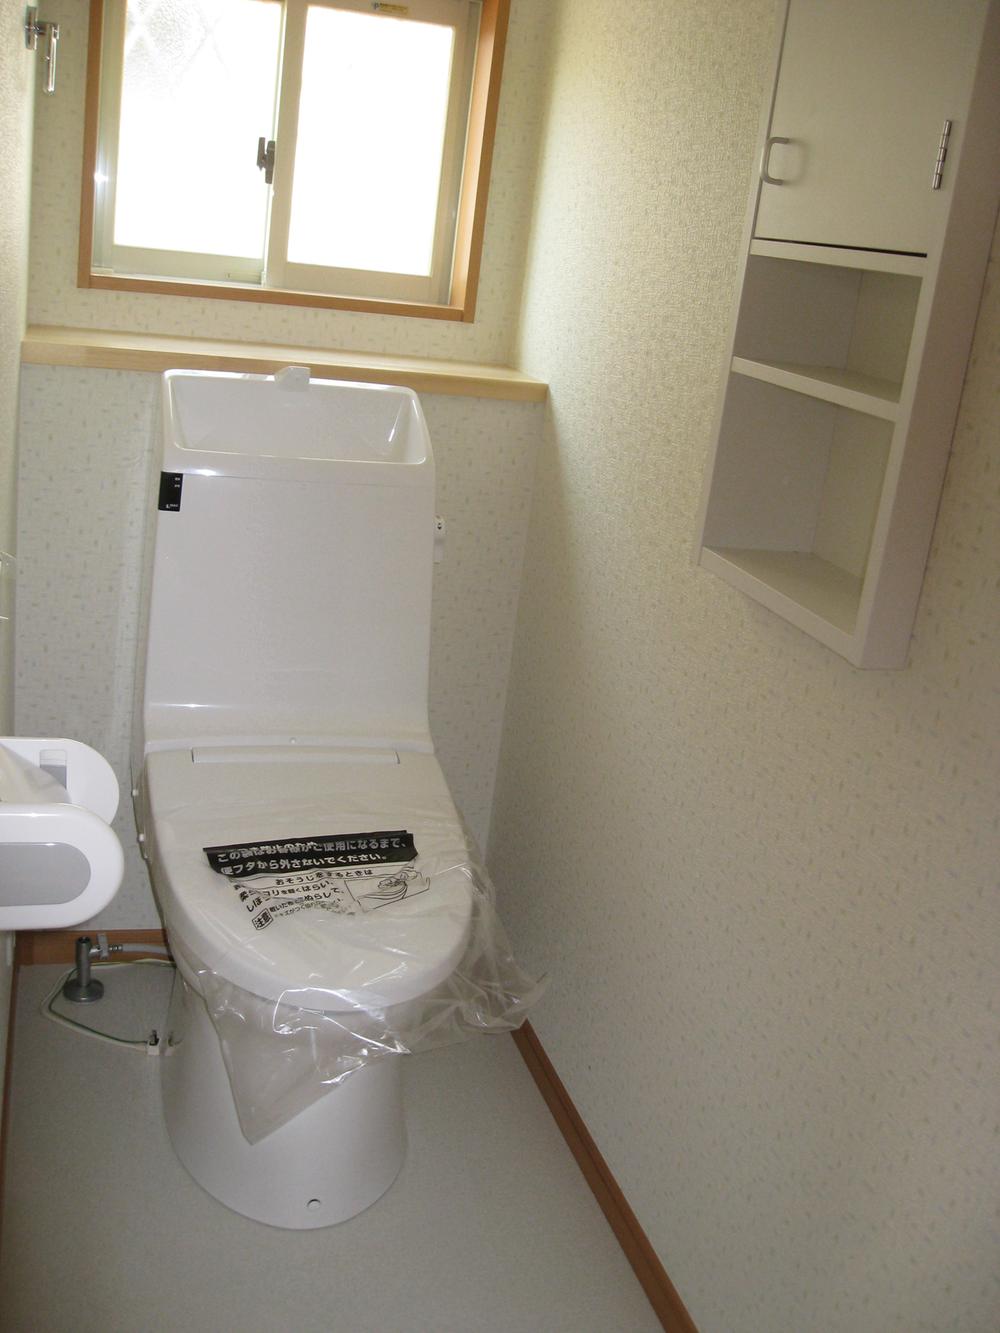 Other Equipment. (1 ・ Both second floor heating toilet seat with bidet)